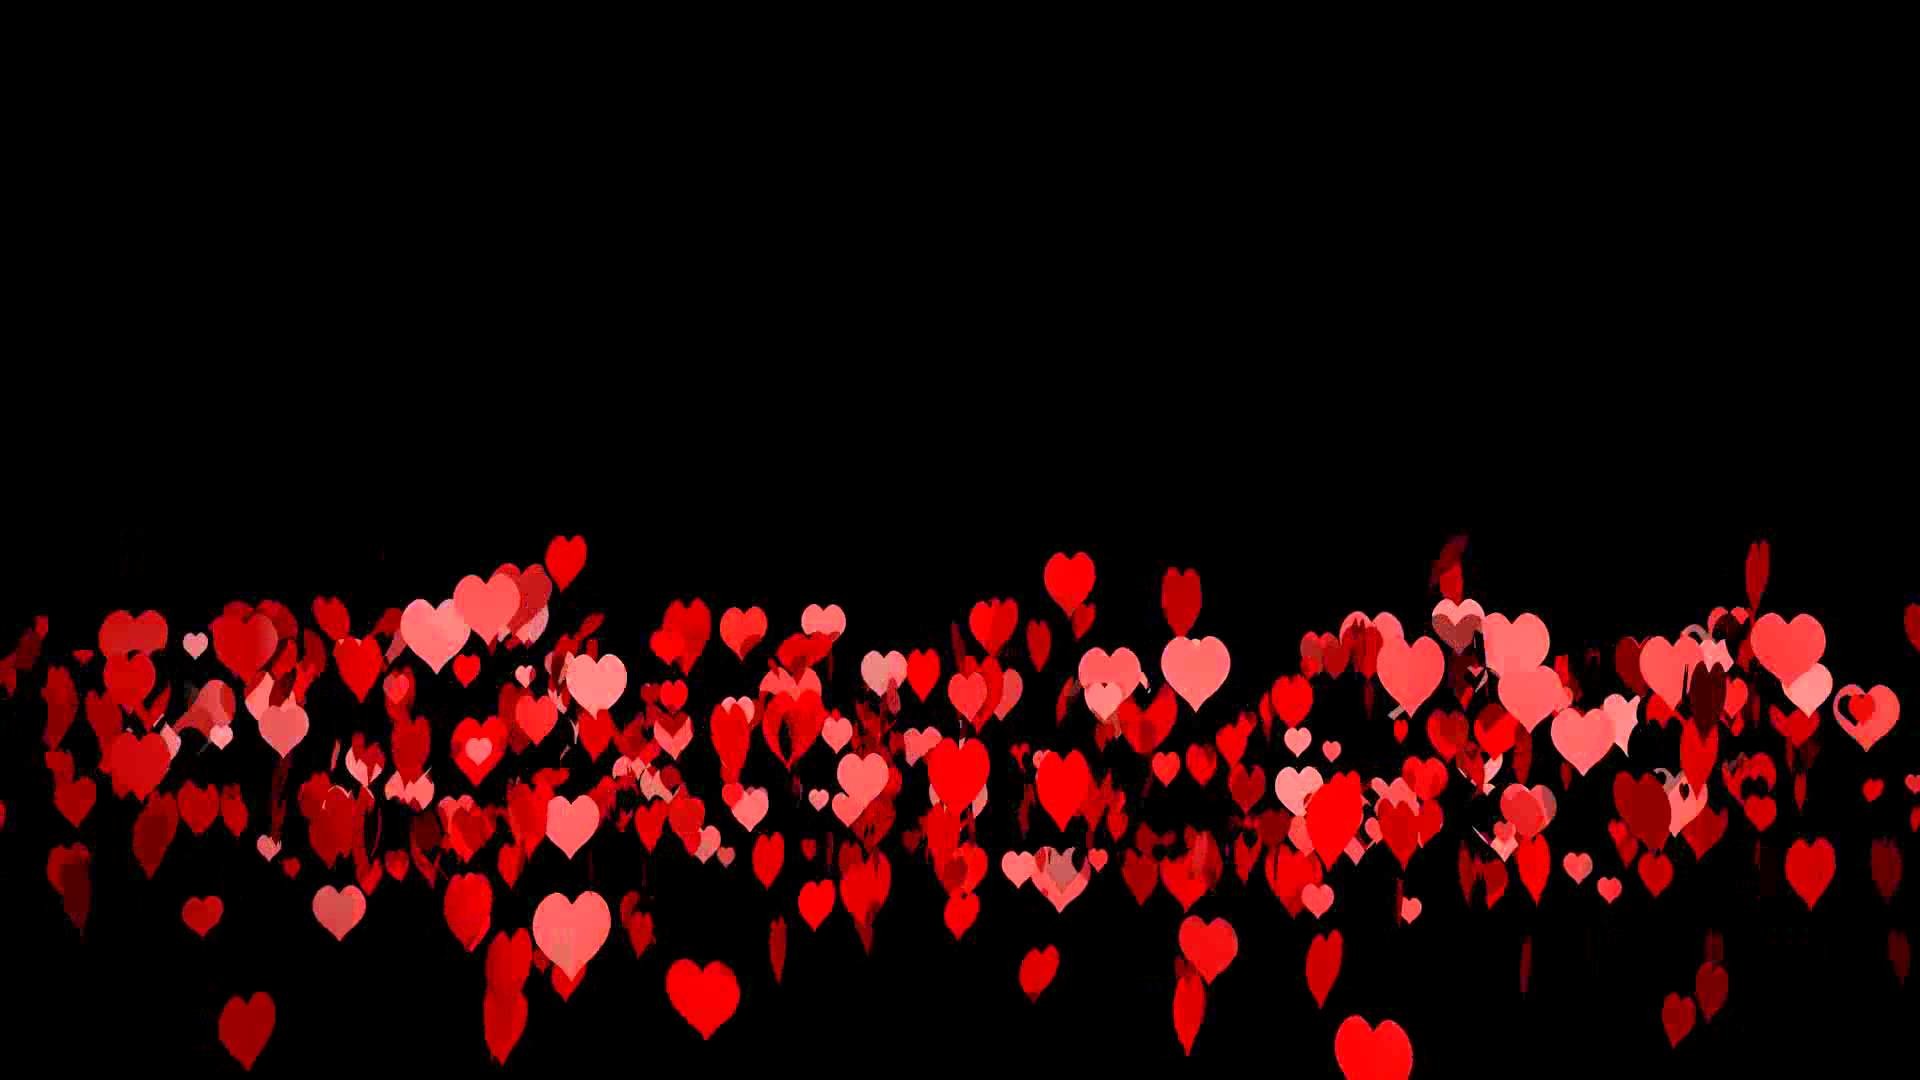 Hearts With Black Background.